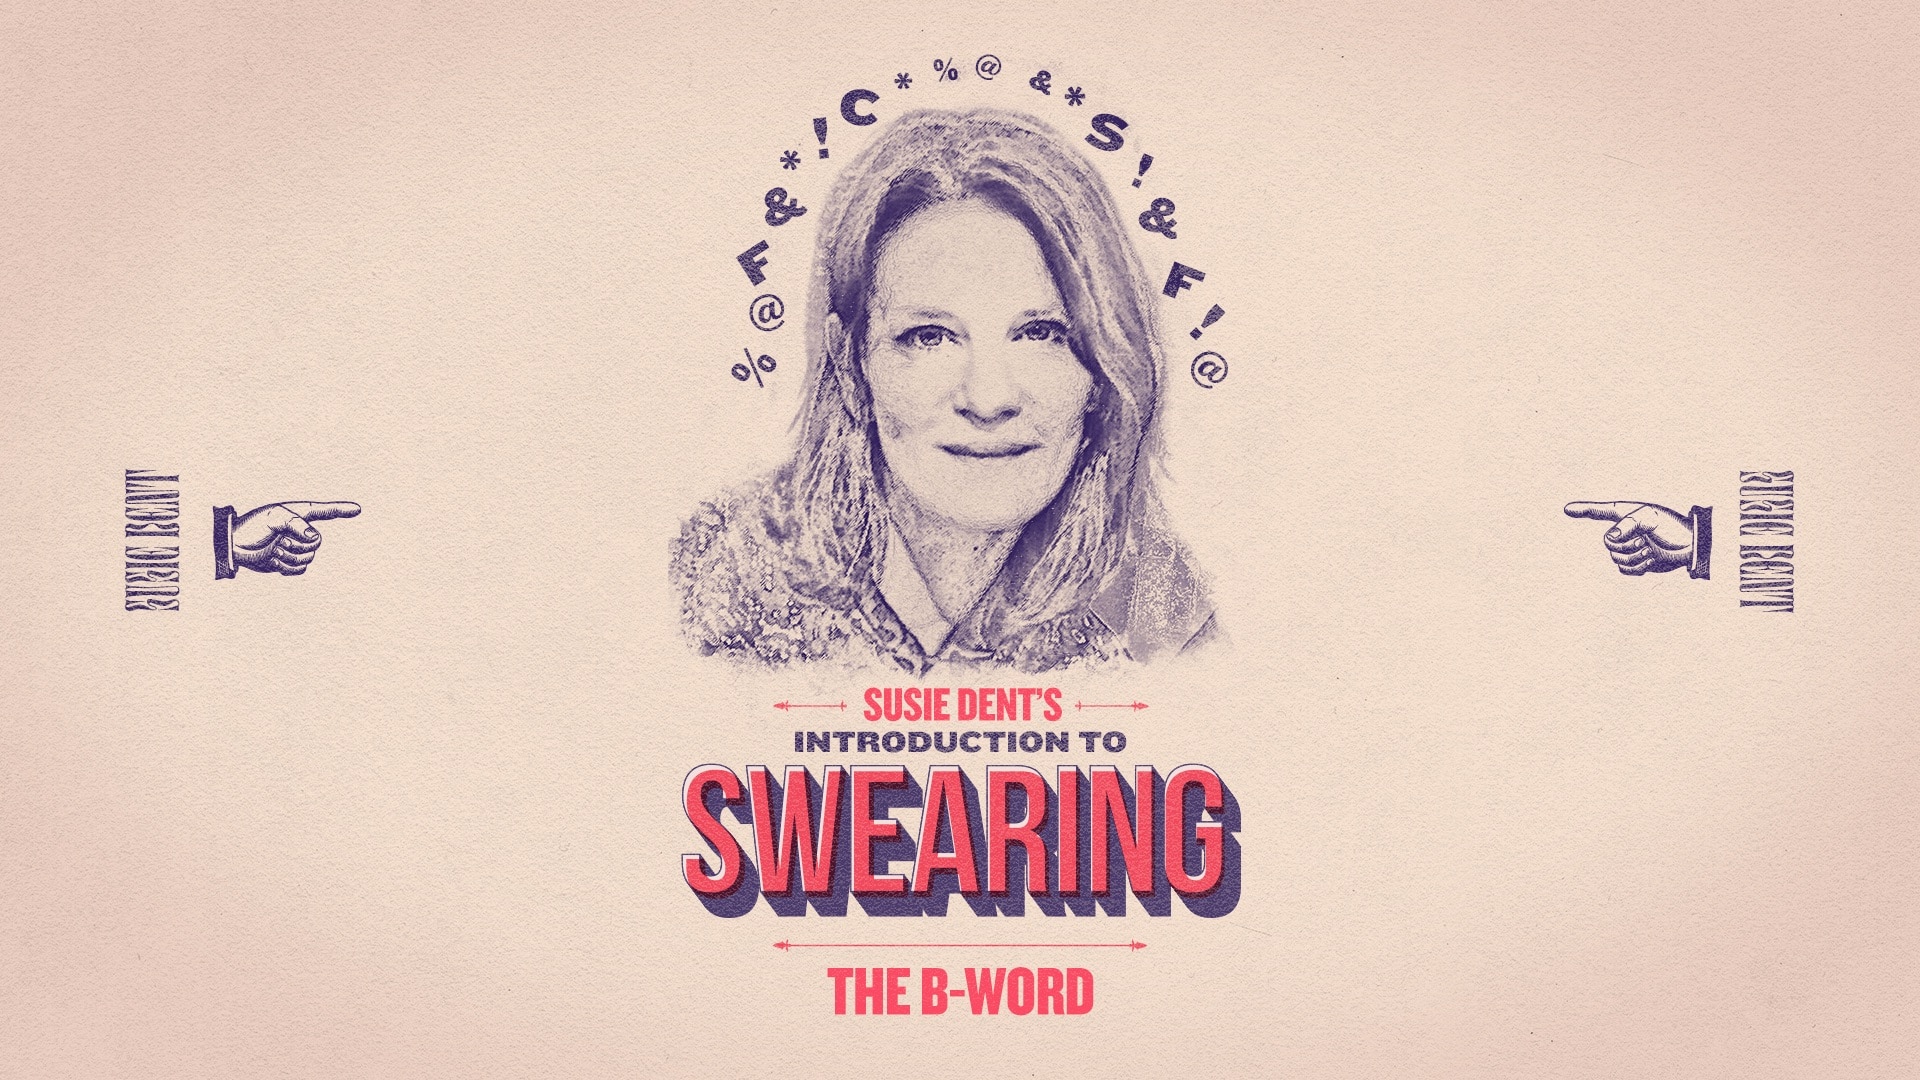 Susie Dent's introduction to swearing: the b-word